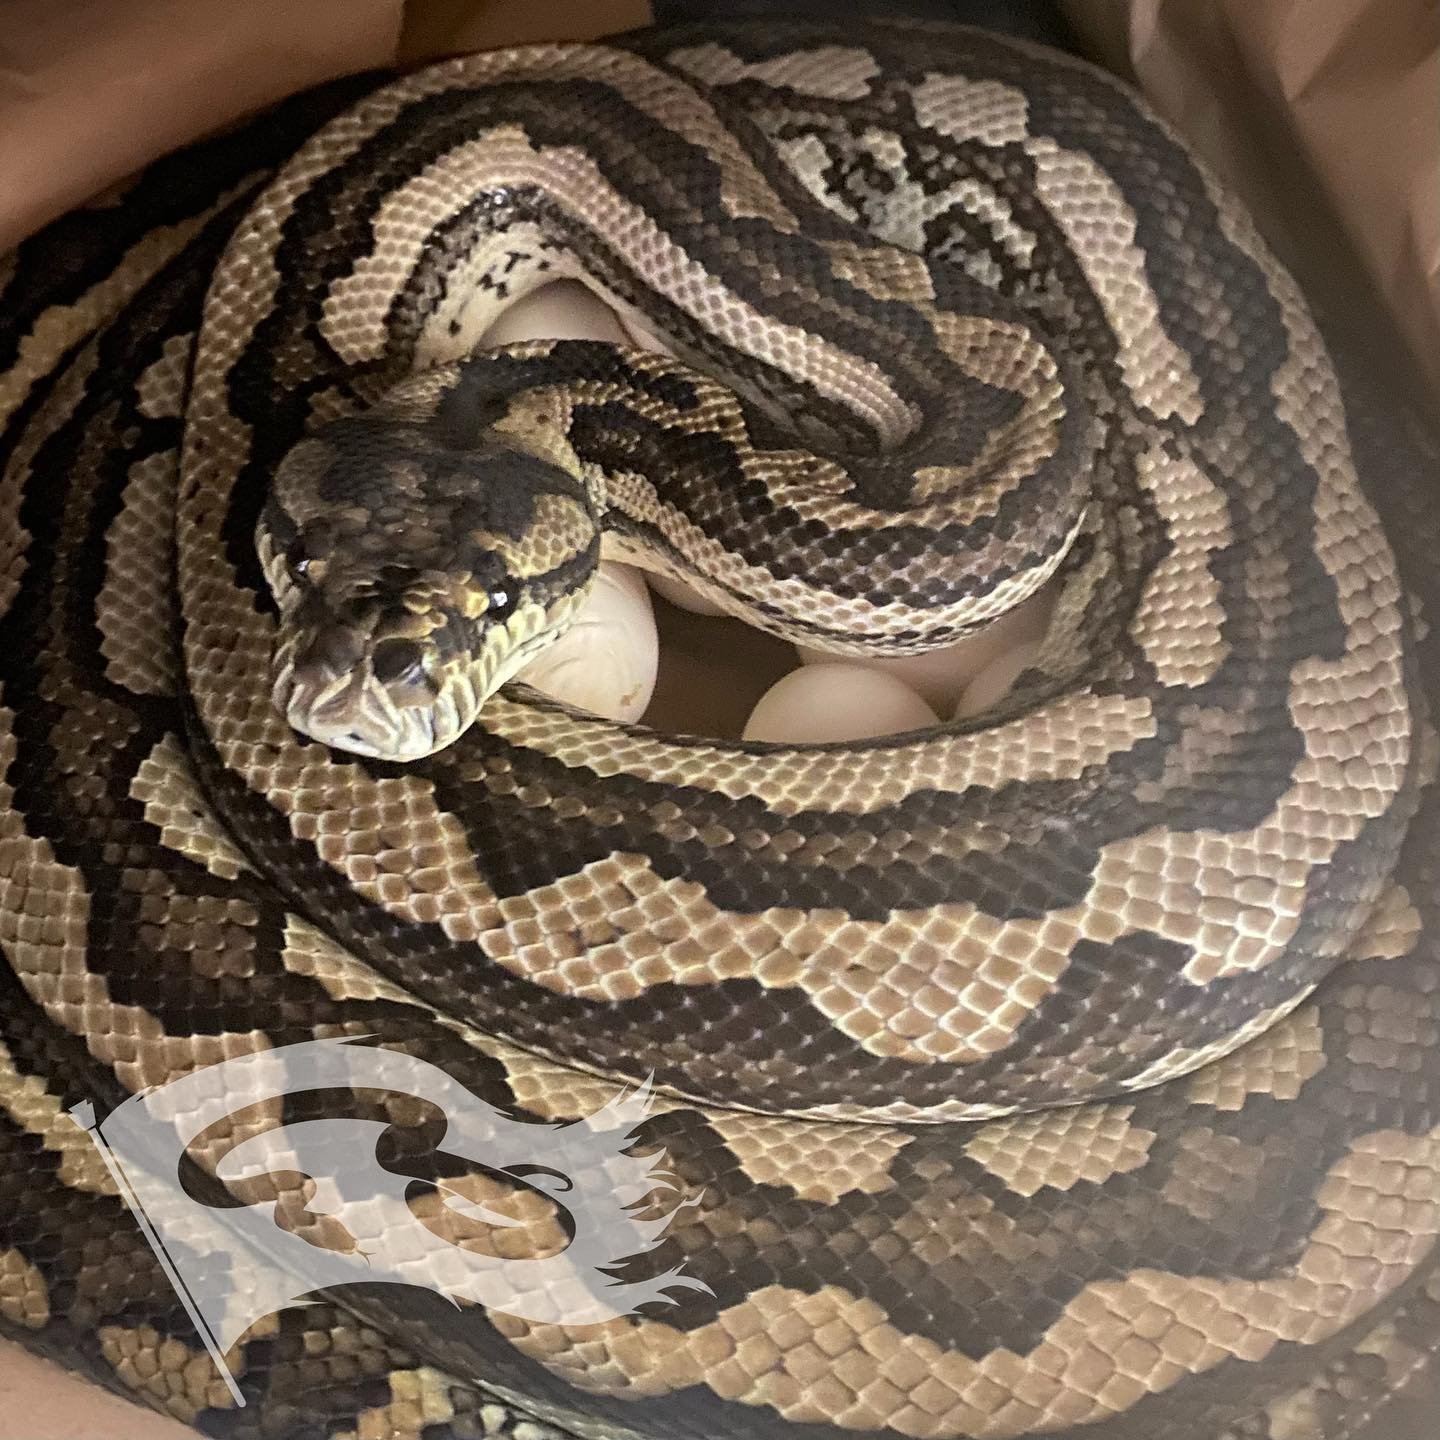 The only carpet clutch of the year on the ground. Tiger X hypo hopefully get some nice hypo tigers out of this clutch

#morelia #moreliapythonradionetwork #moreliapythons #moreliapython #moreliapythonradio #tigercarpetpython #coastalcarpetpython #car